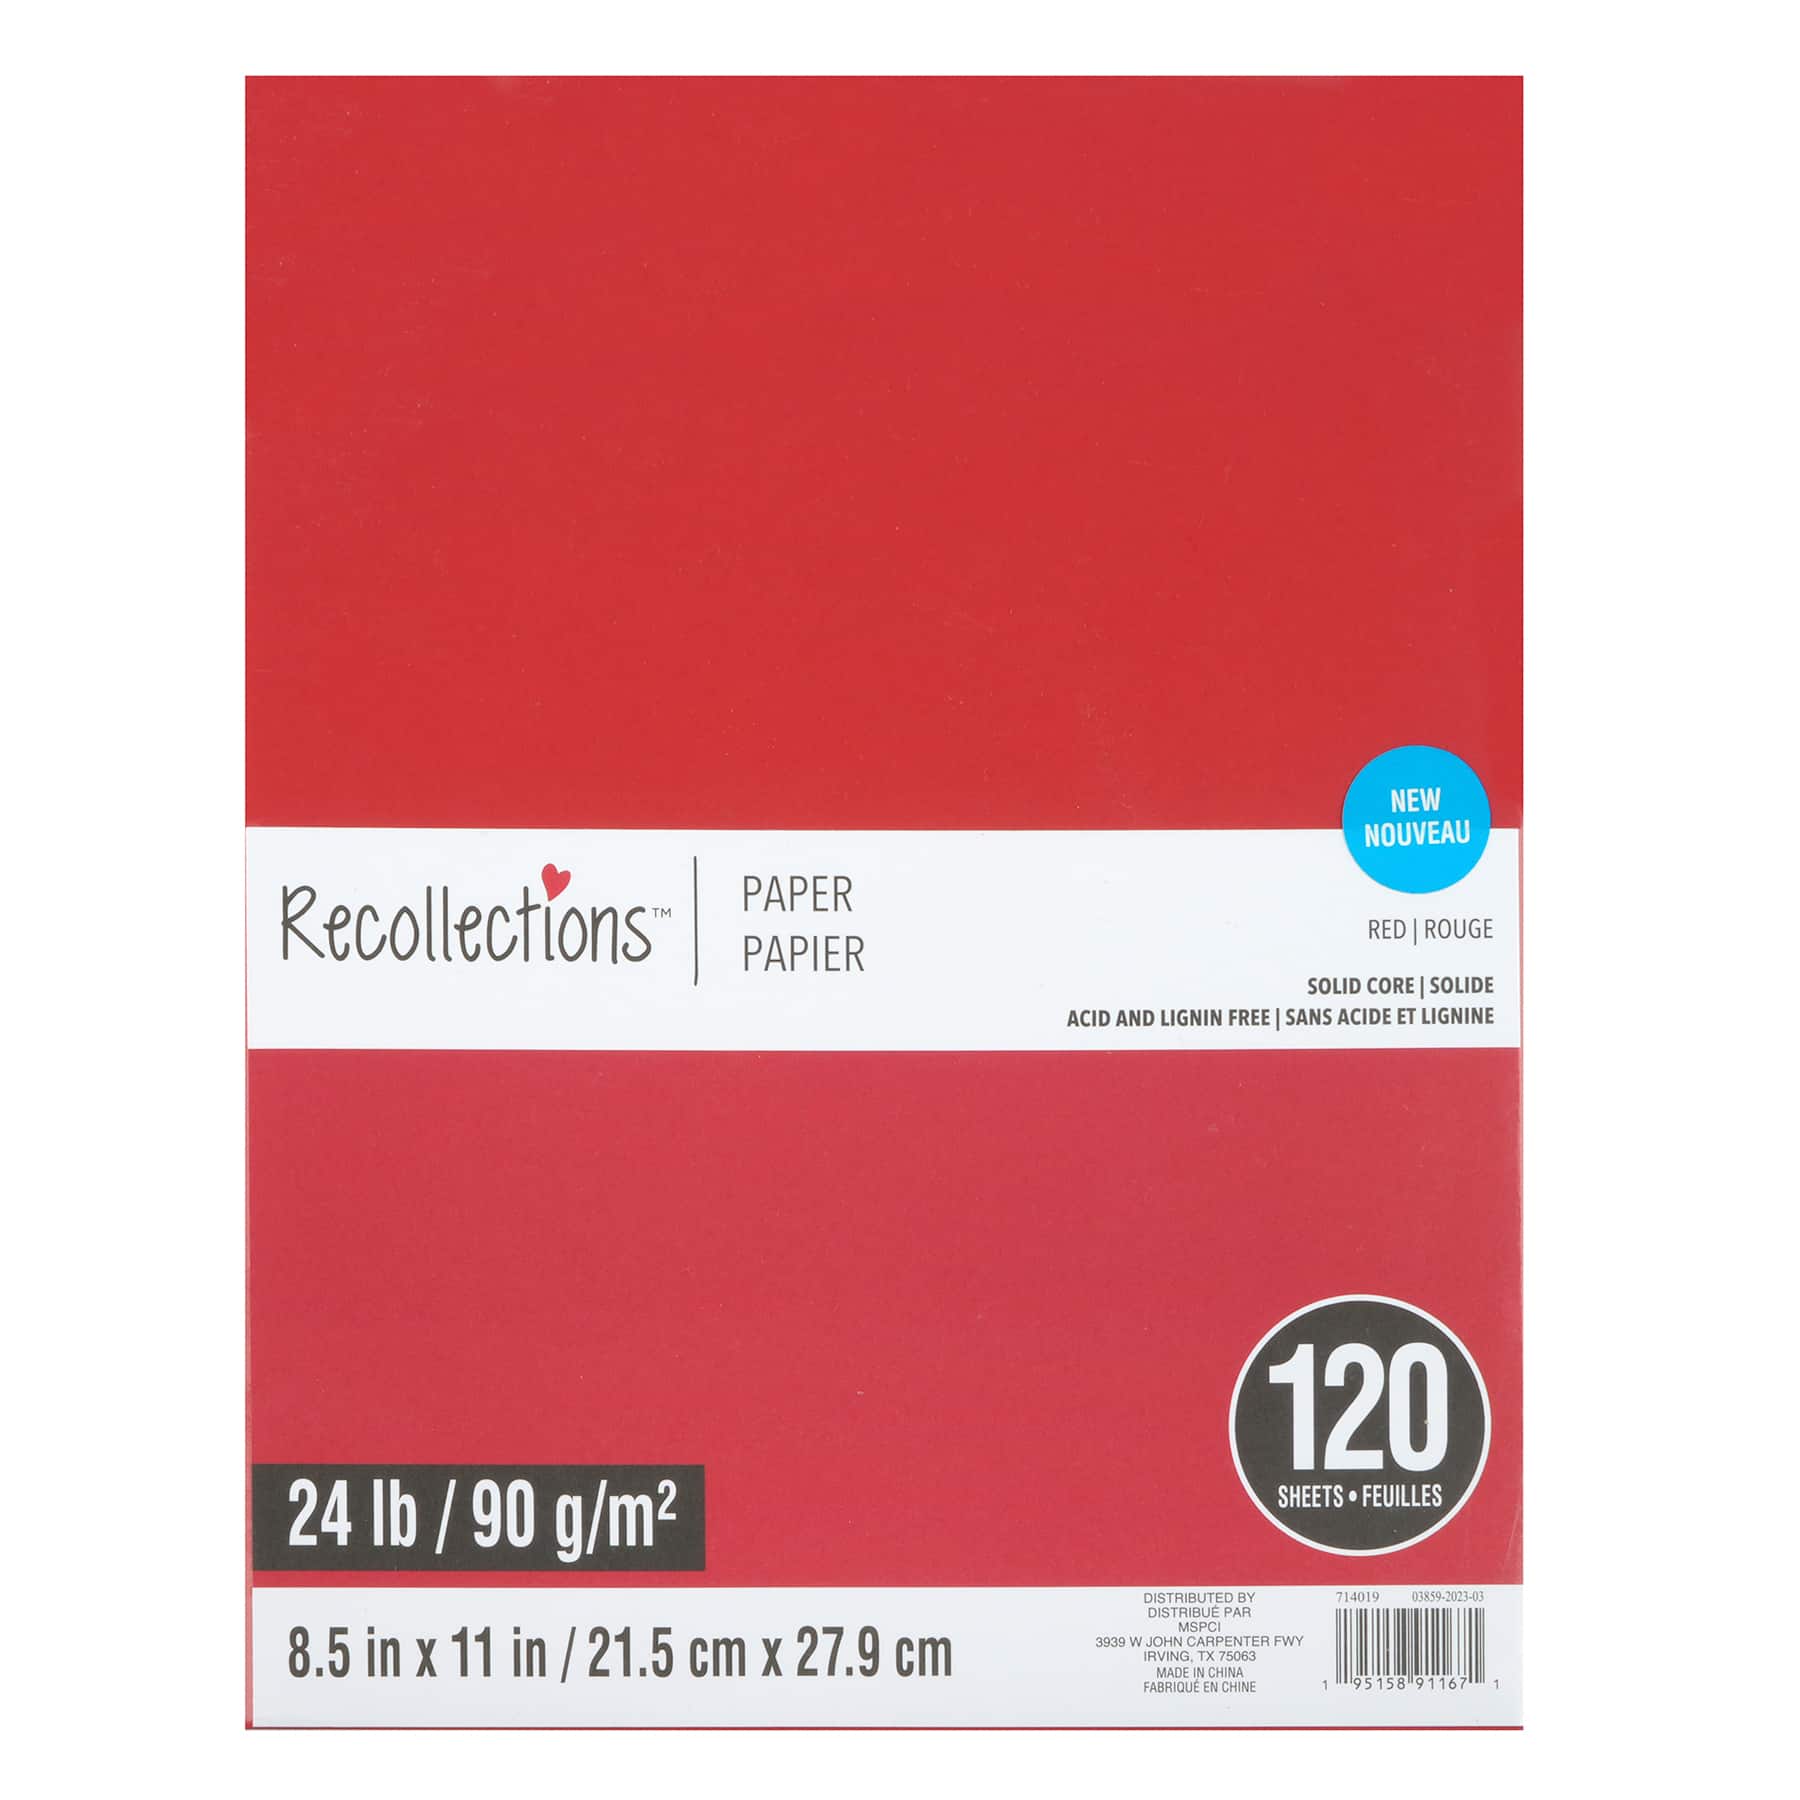 Recollections 120 Sheets Paper - Red - 8.5 x 11 in